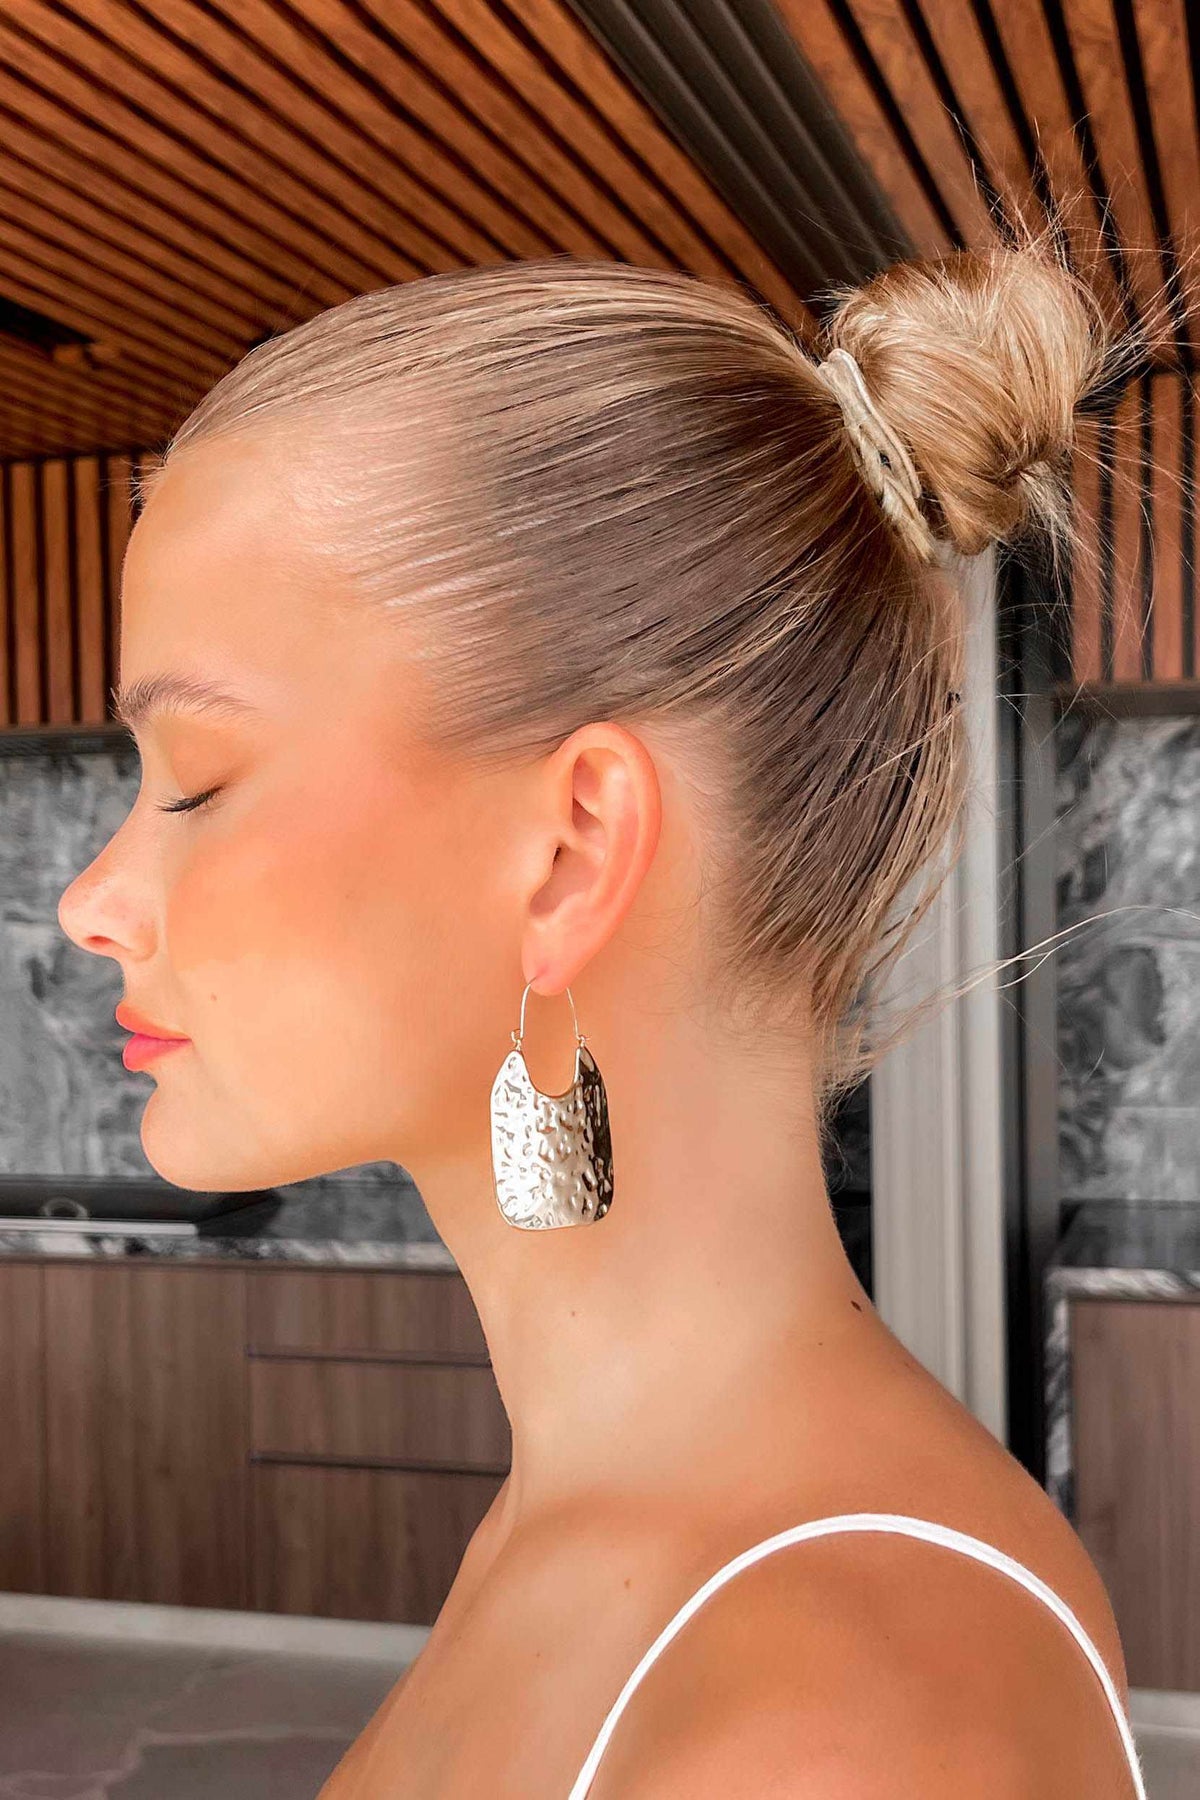 Energy Earrings, ACCESSORIES, EARRINGS, GOLD, JEWELLERY, Our New Energy Earrings Is Now Only $26.00 Exclusive At Mishkah, We Have The Latest Fashion Accessories @ Mishkah Online Fashion Boutique Our New Energy Earrings is now only $26.00-MISHKAH